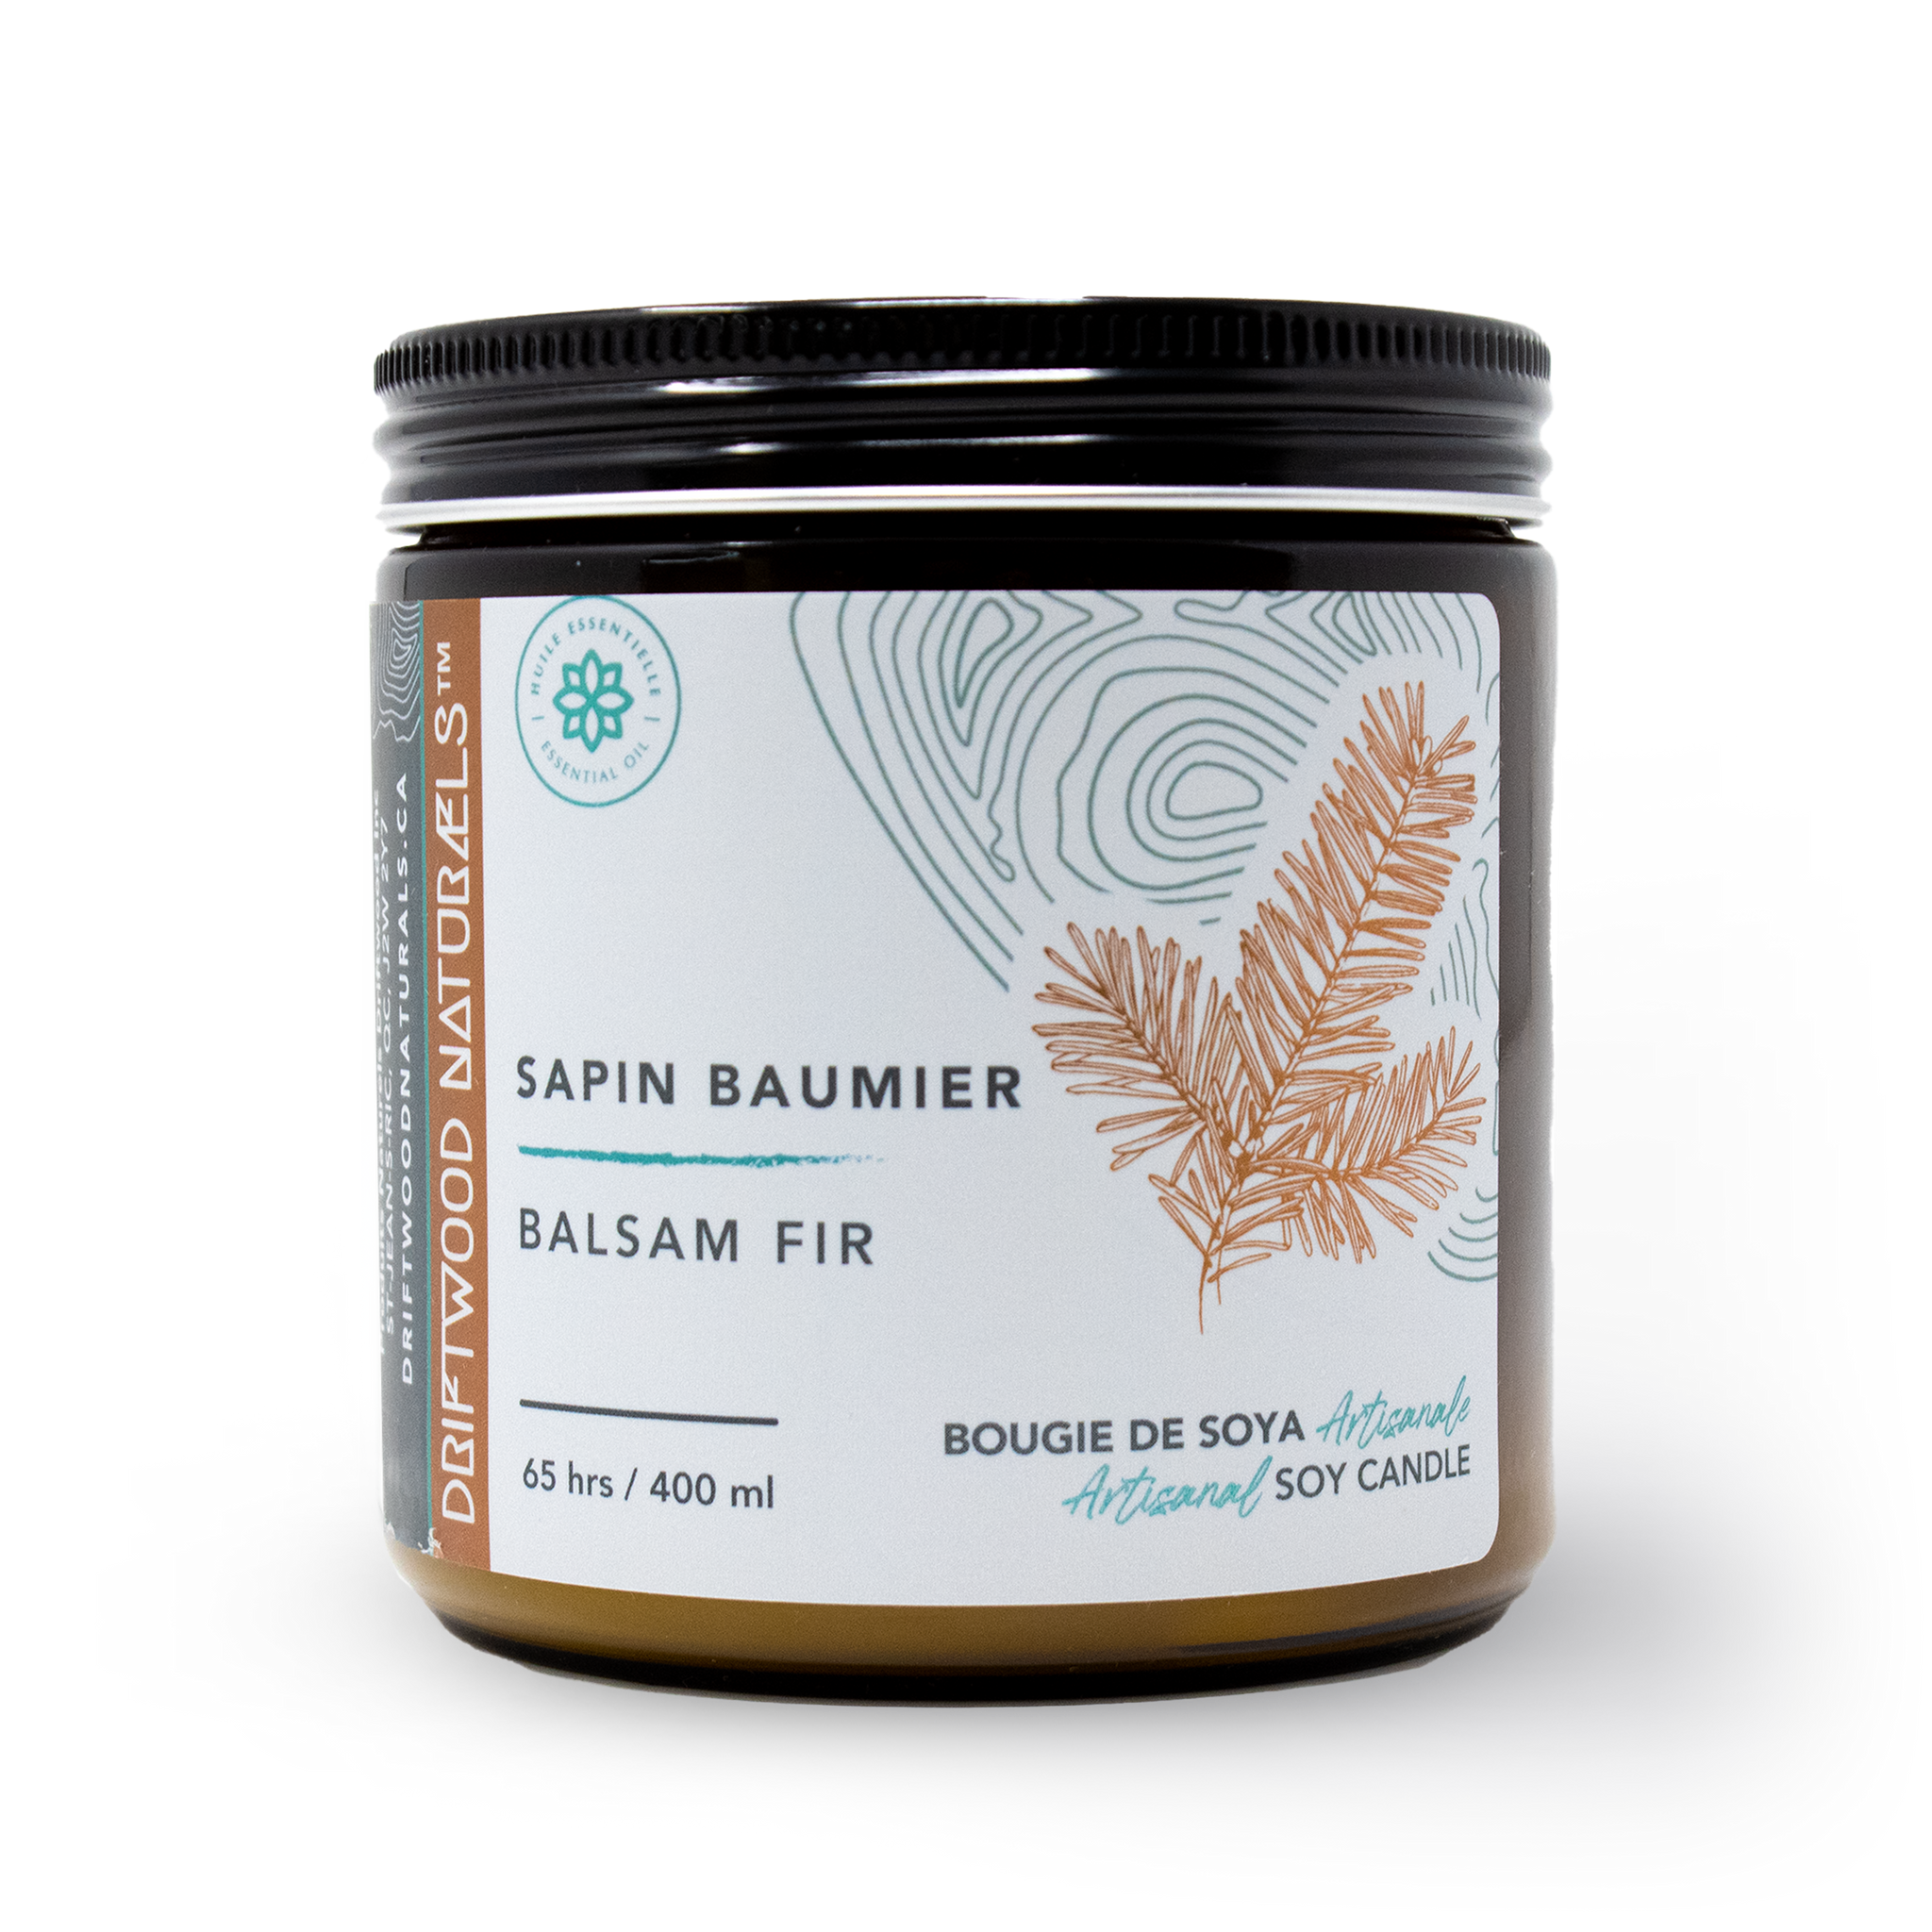 Balsam Fir (Amber, Limited Edition) — Artisanal Soy Candle